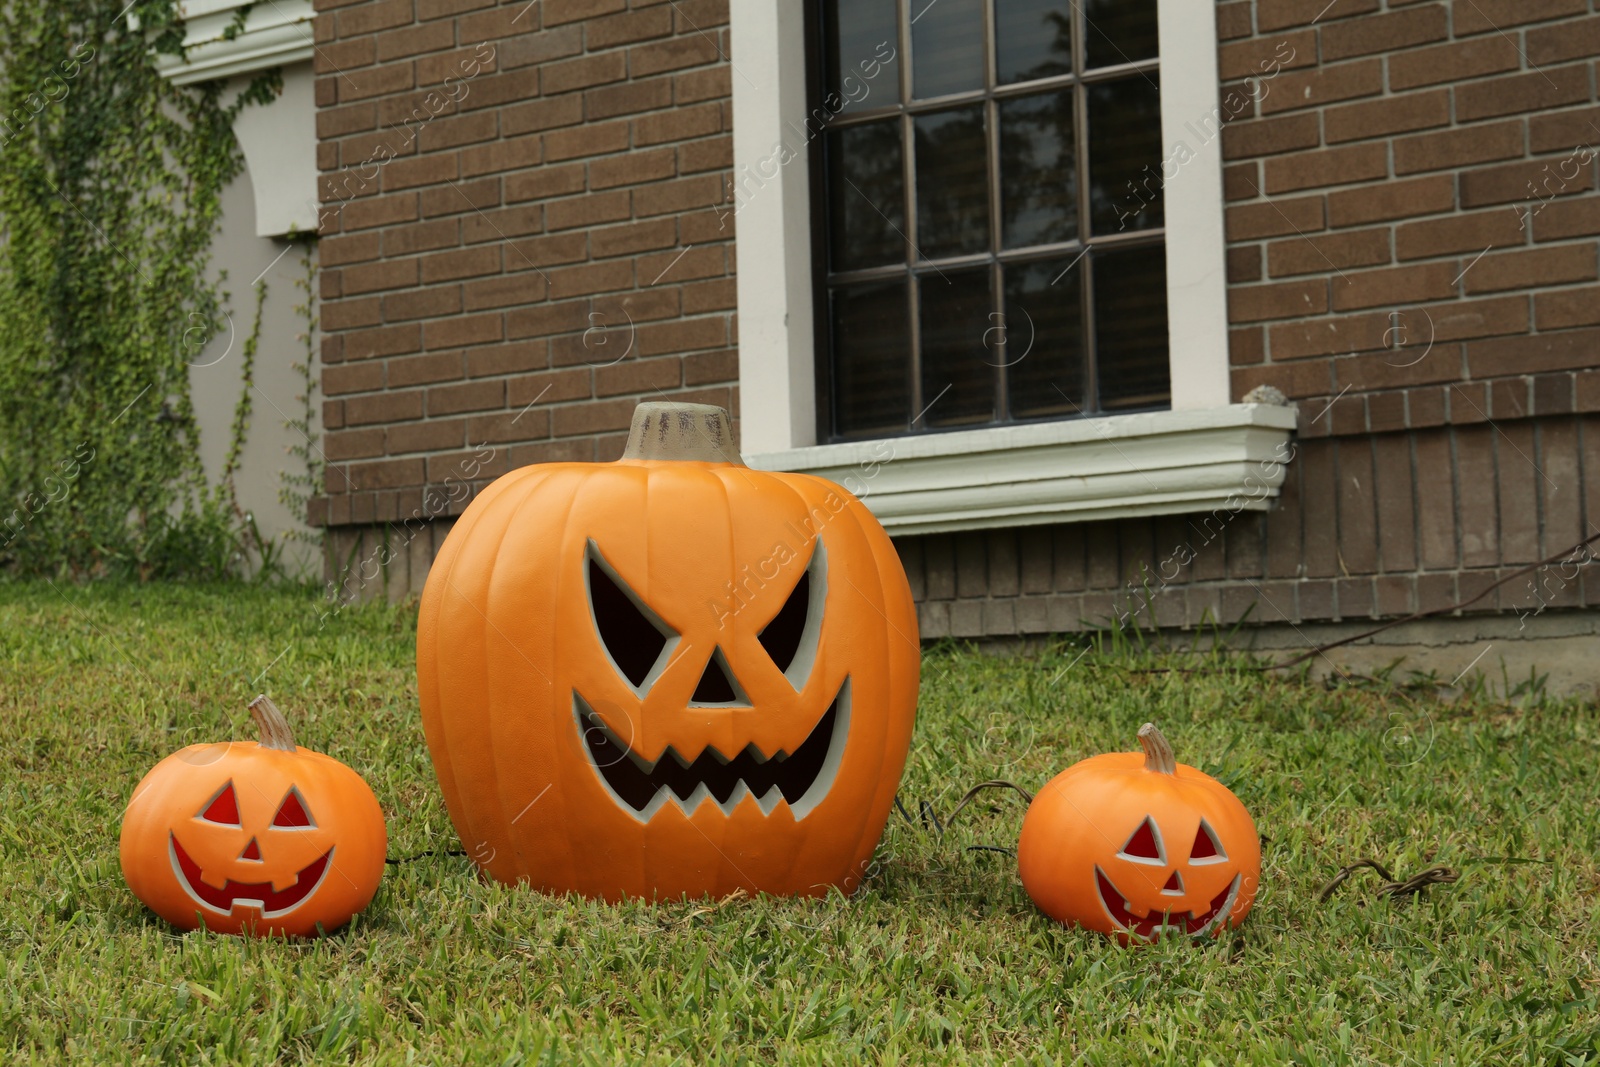 Photo of Ceramic Jack O'Lanterns on front lawn of house. Traditional Halloween decor